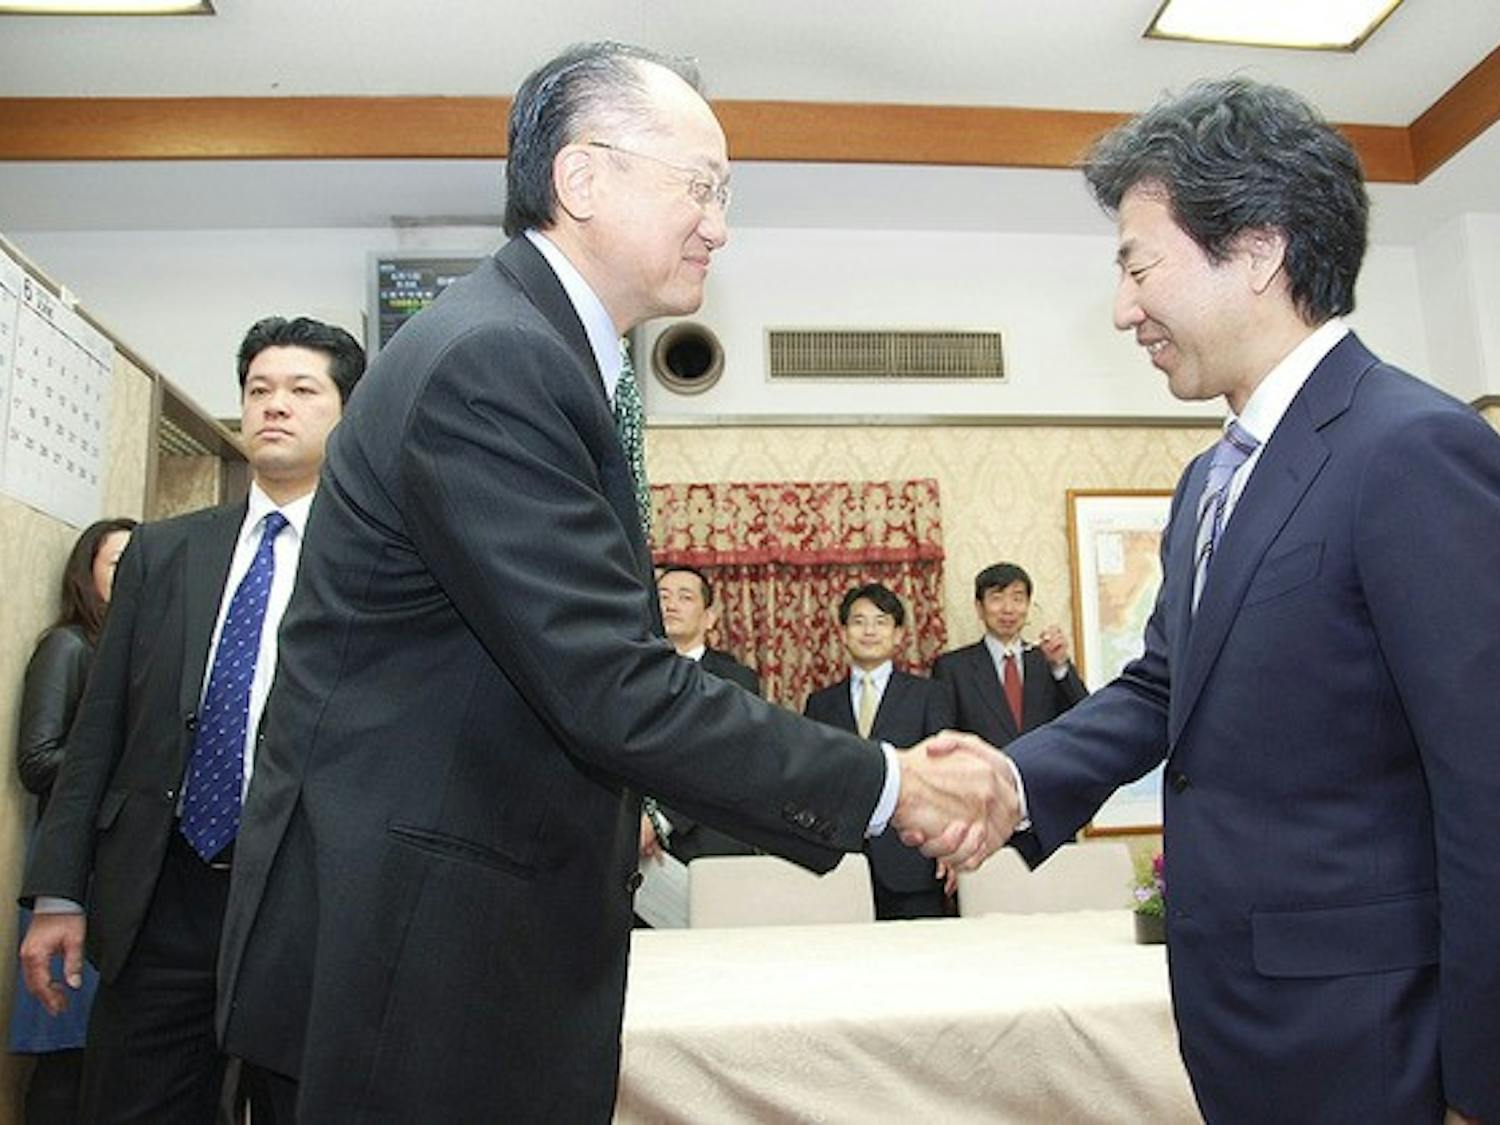 College President Jim Yong Kim met with the Japanese finance minister as part of his worldwide tour to garner support from key World Bank countries.